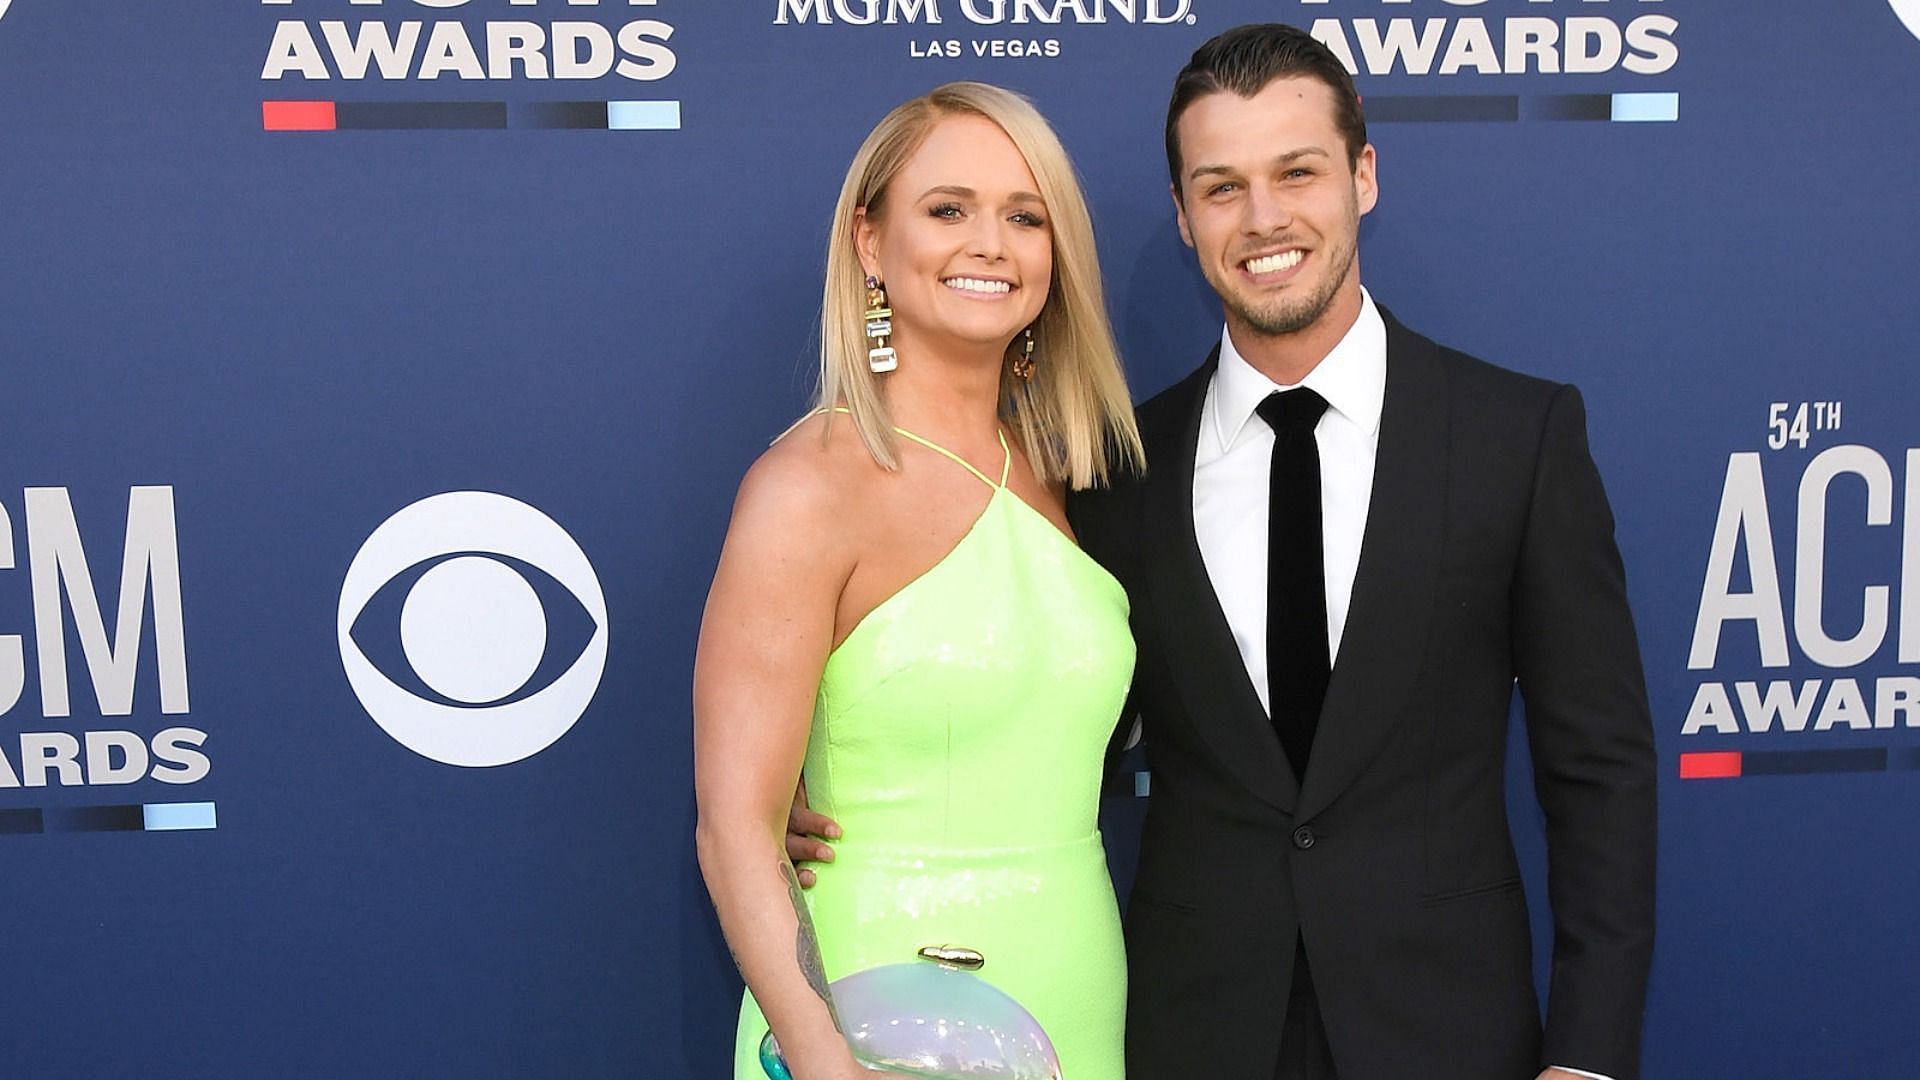 Miranda Lambert and Brendan McLoughlin first met in 2018 and got married in a secret ceremony in 2019 (Image via Getty Images/ Ethan Miller)